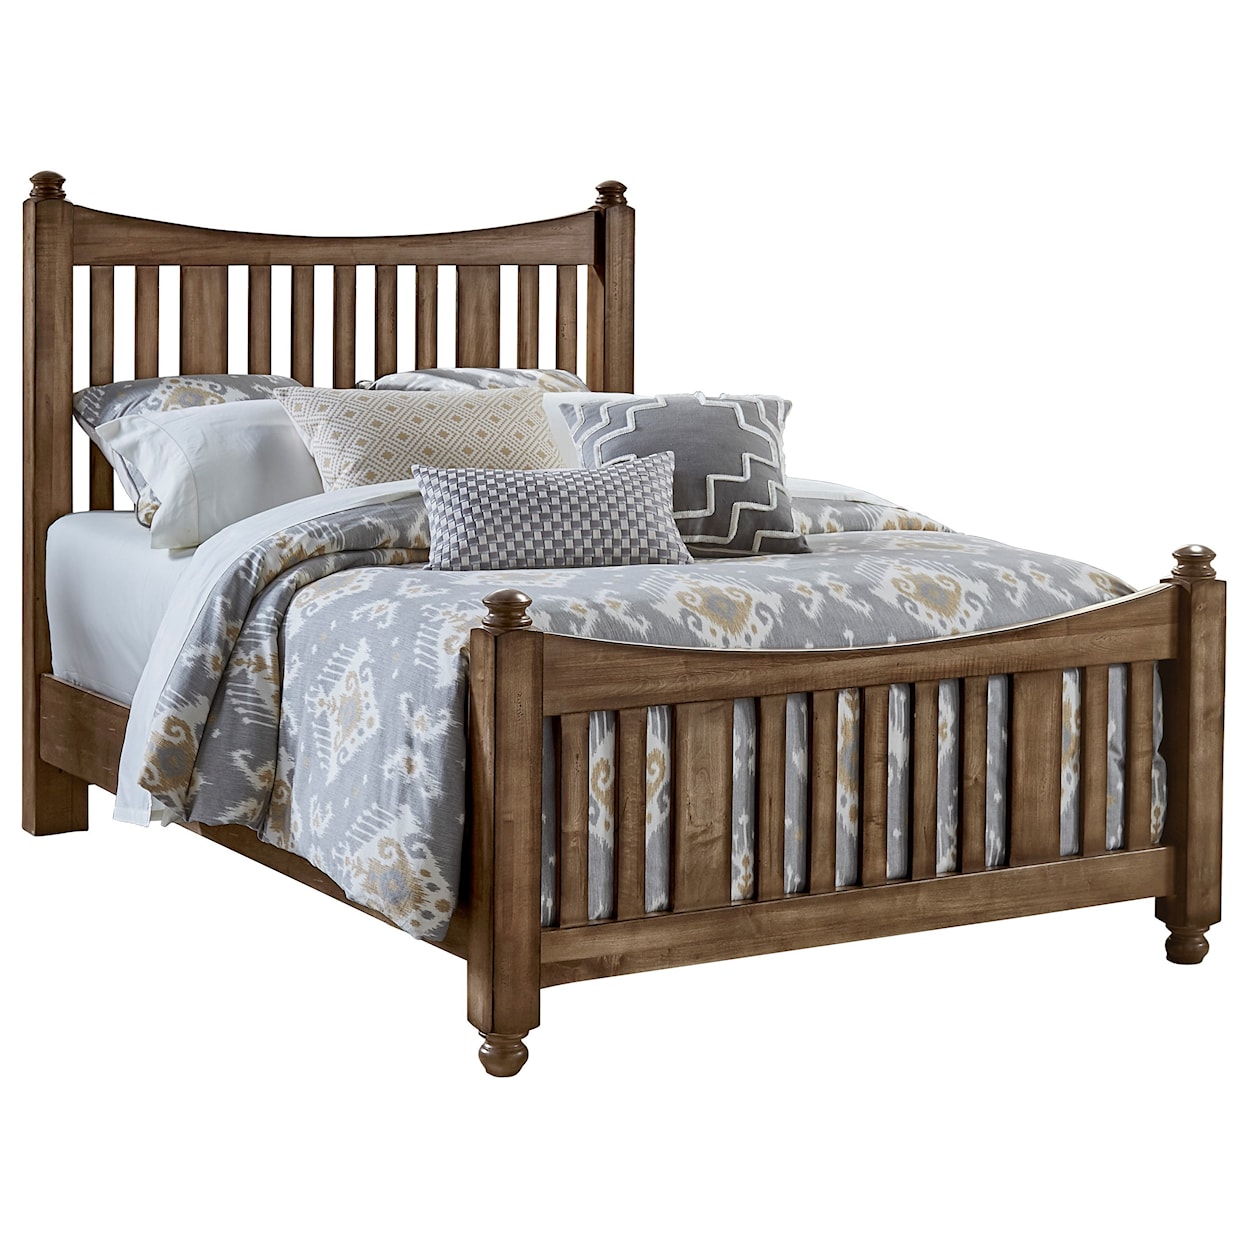 Virginia House Mt Airy Queen Slat Poster Bed